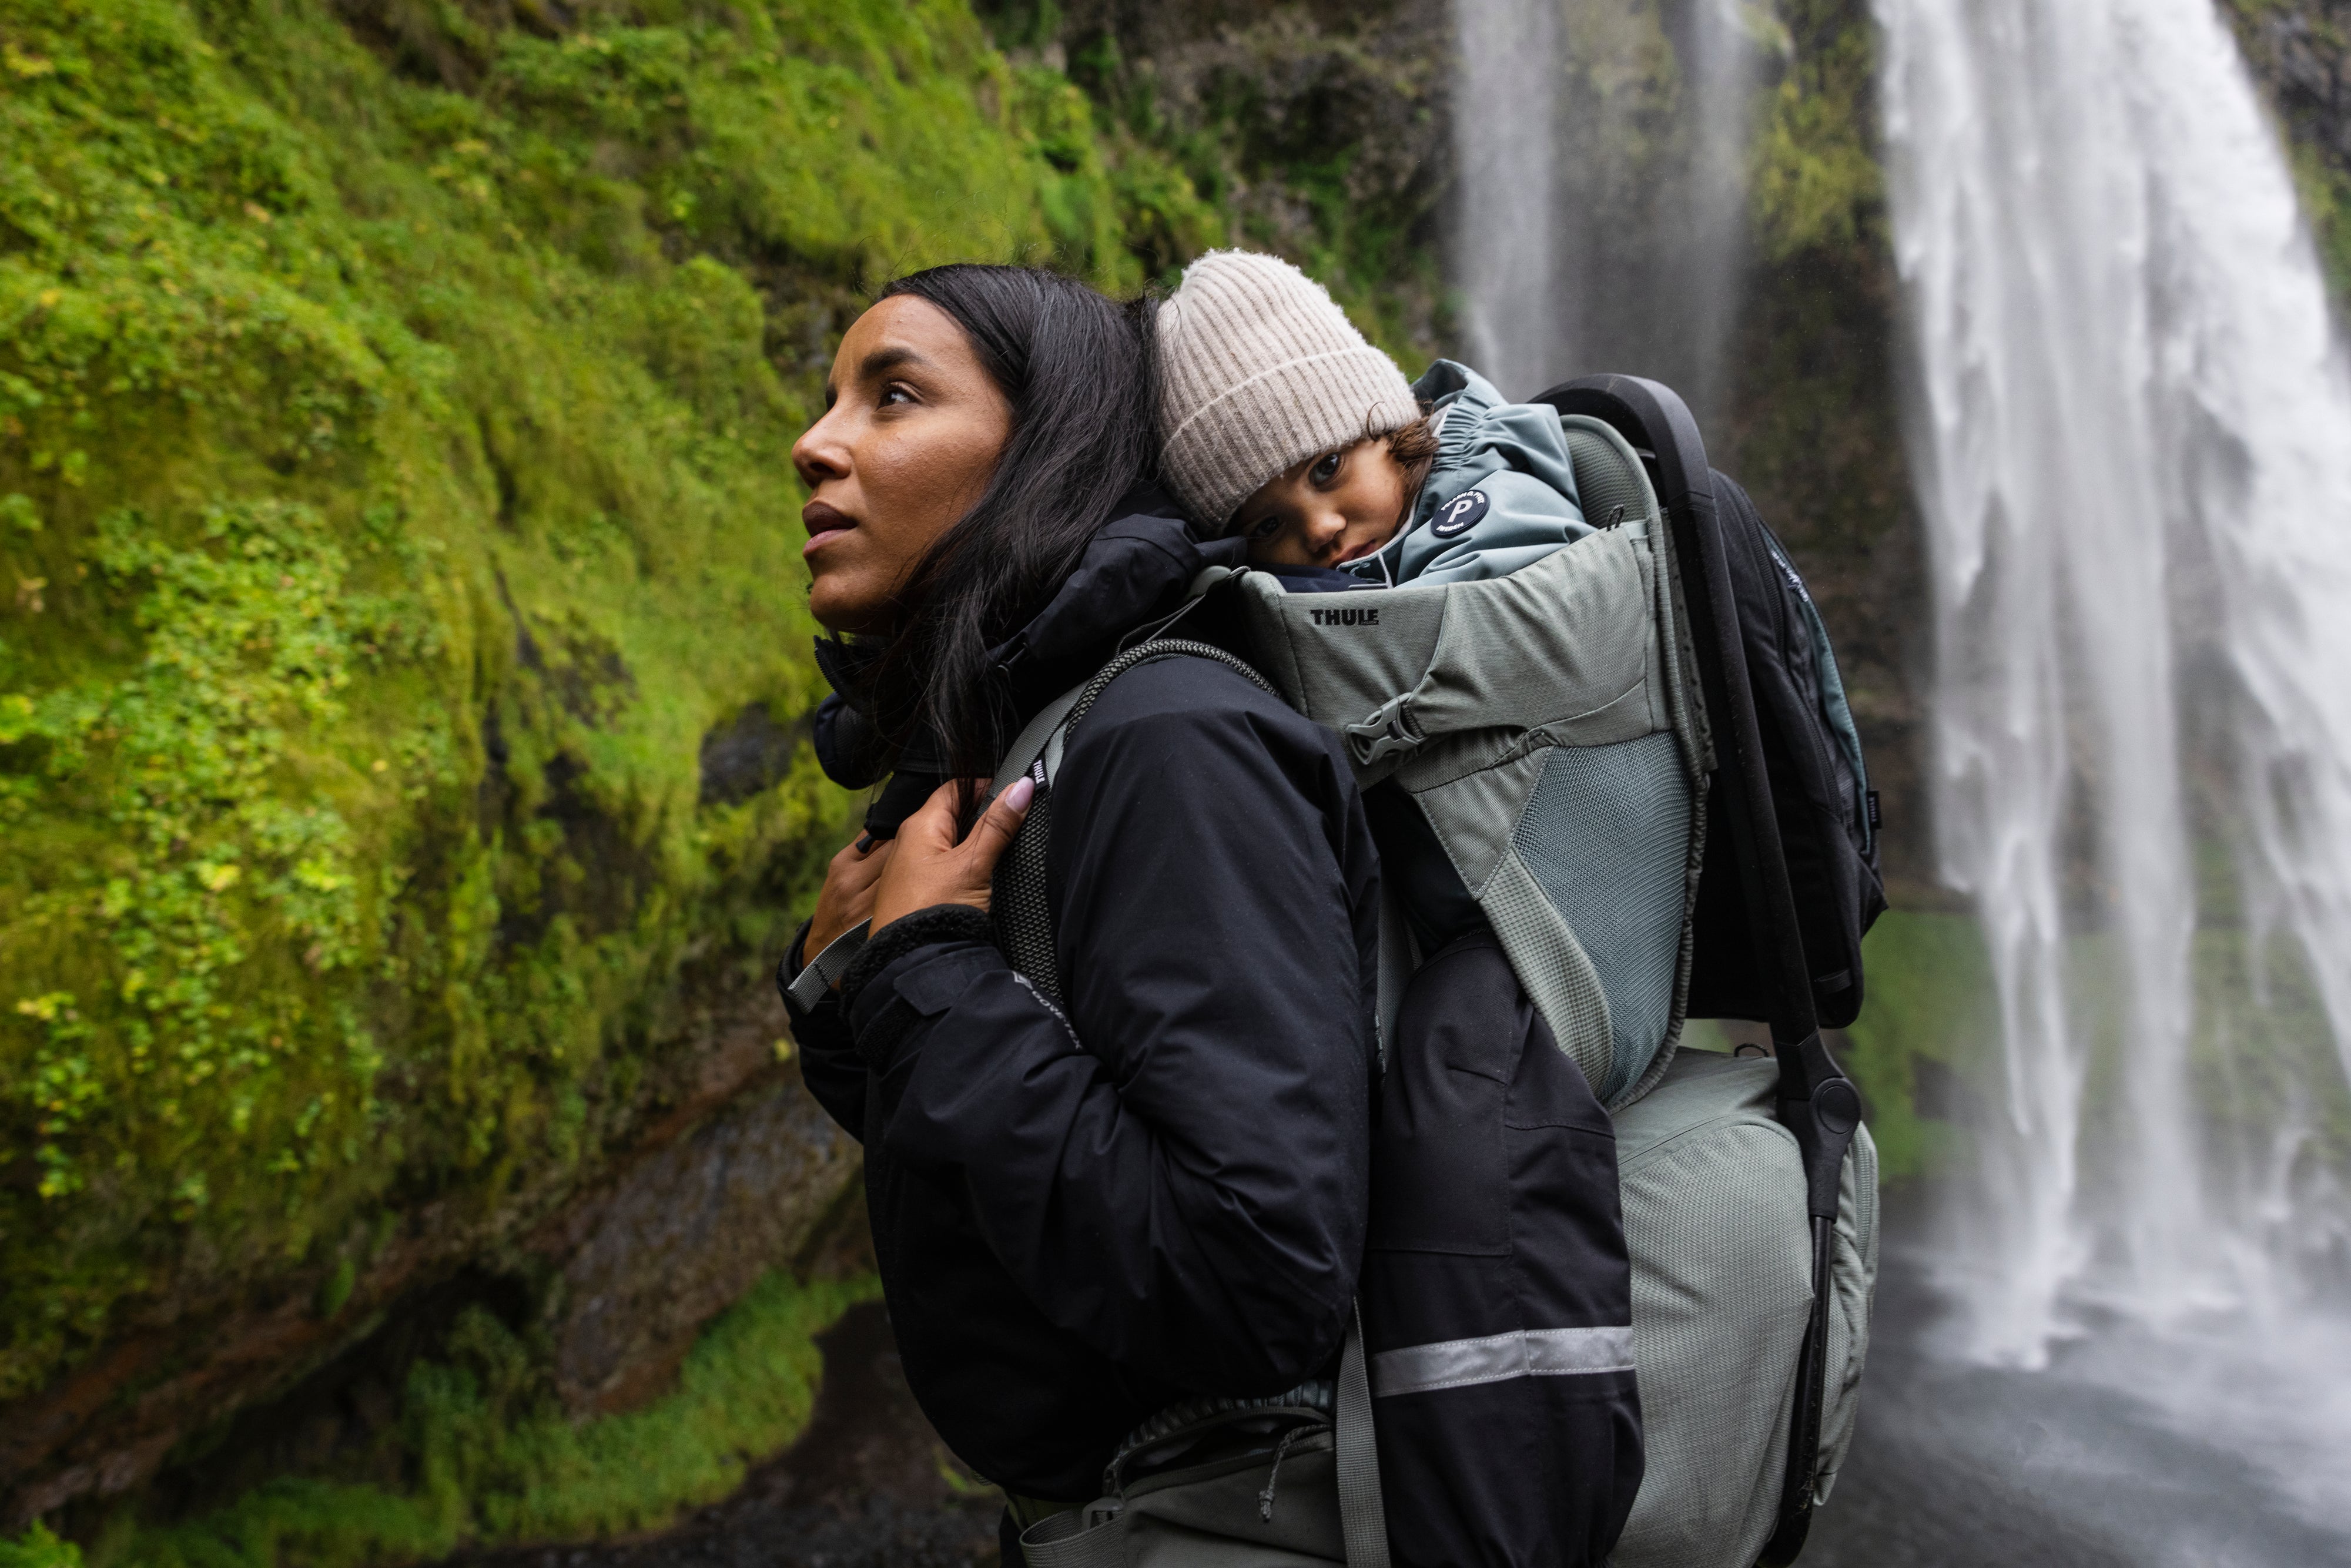 Mum carrying child in child carrier backpack while hiking in nature waterfalls